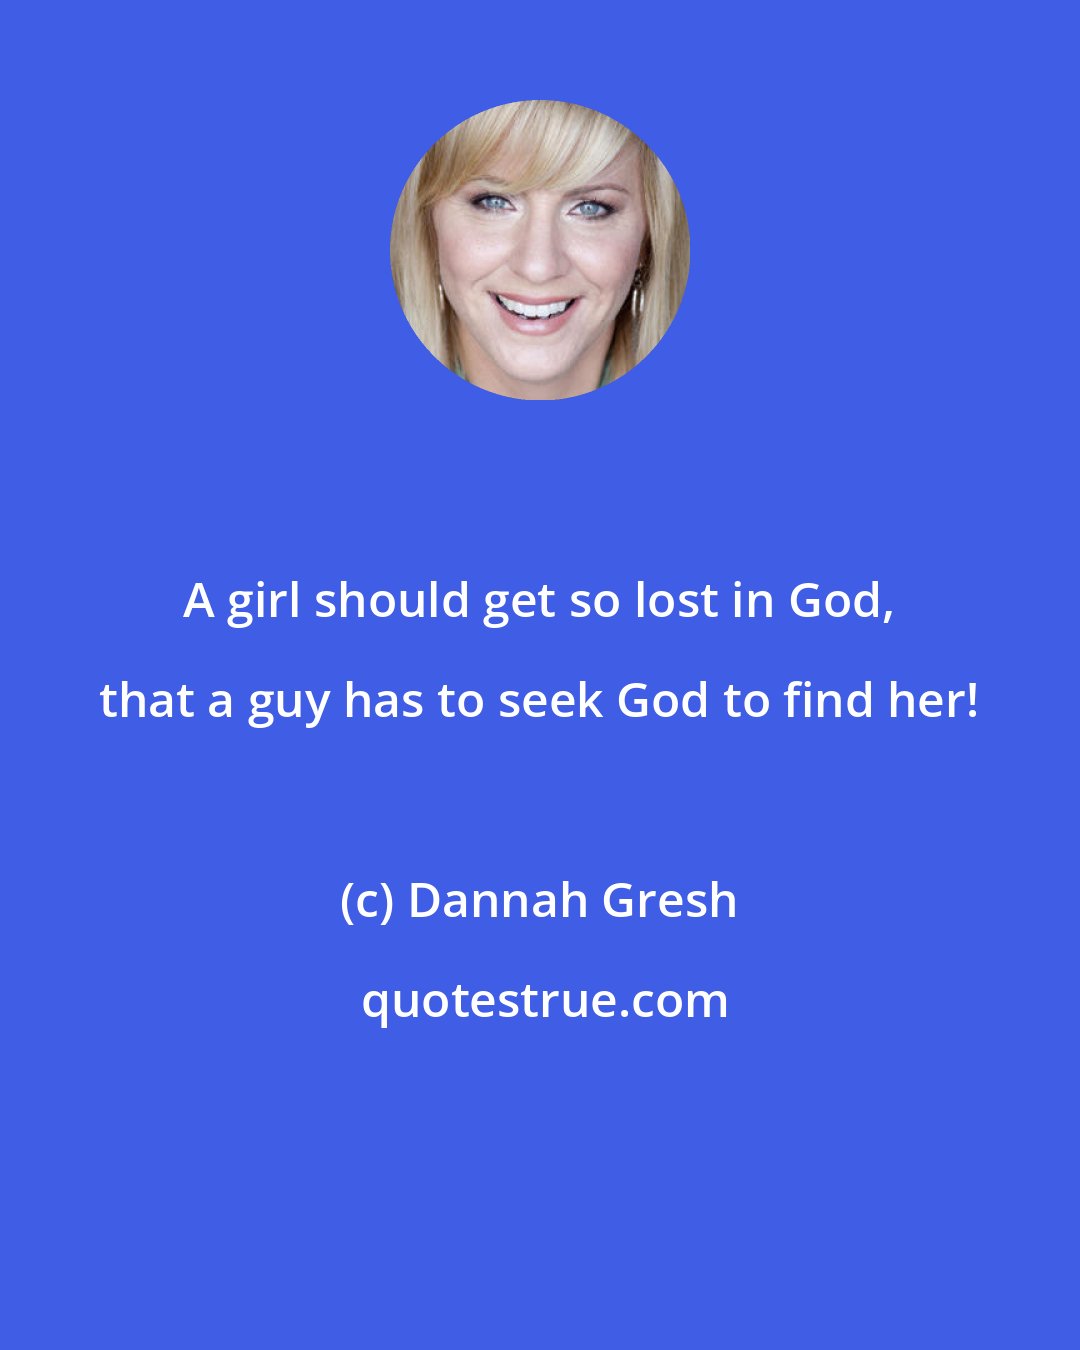 Dannah Gresh: A girl should get so lost in God, that a guy has to seek God to find her!